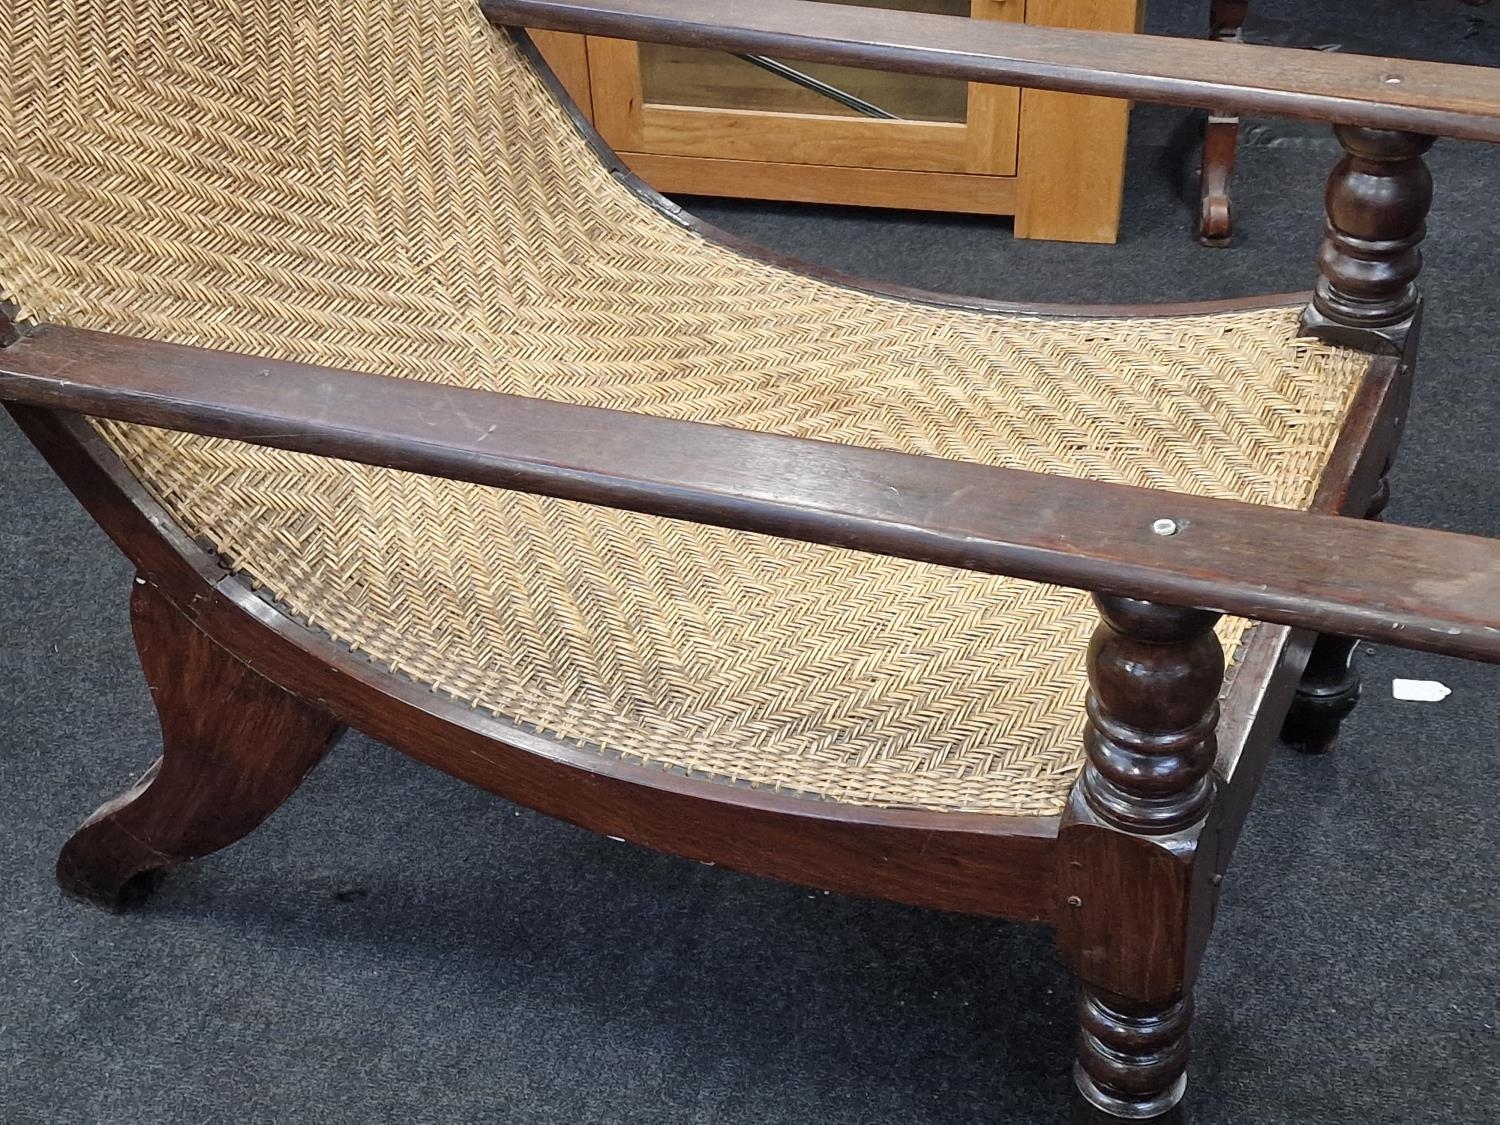 Anglo Dutch colonial Plantation chair with arm extenders on turned supports with a woven back rest - Image 4 of 5